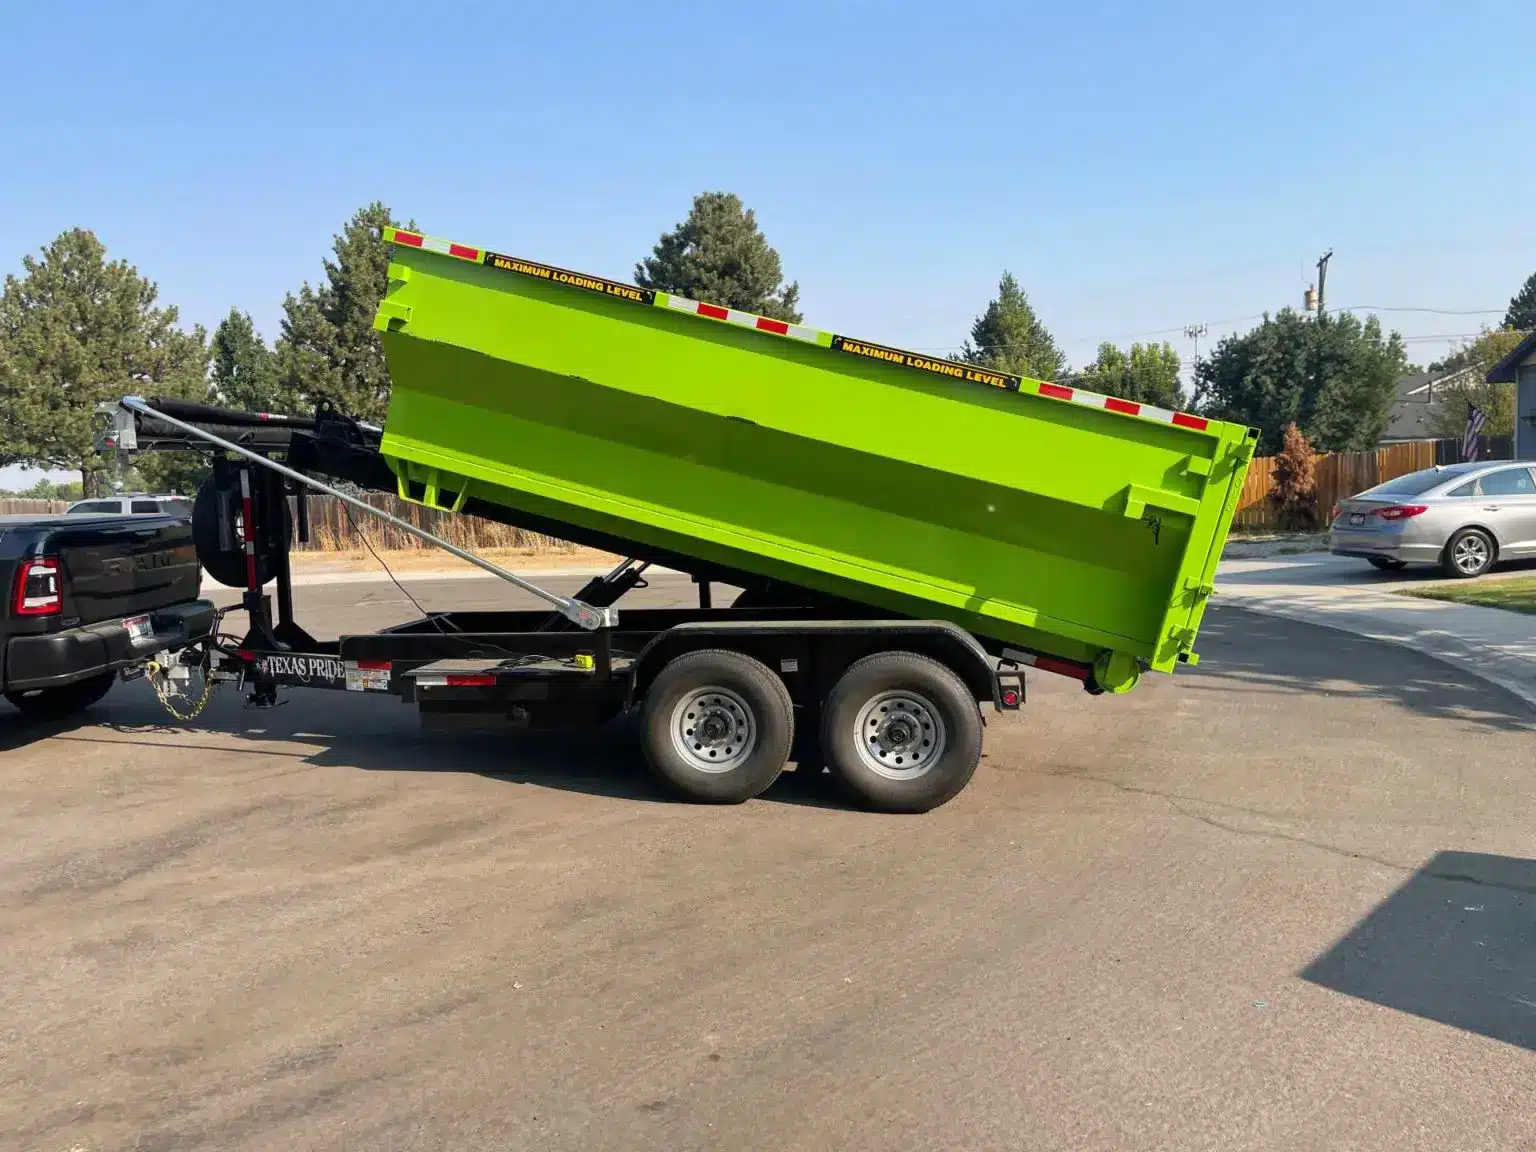 17 cubic yard roll of dumpster